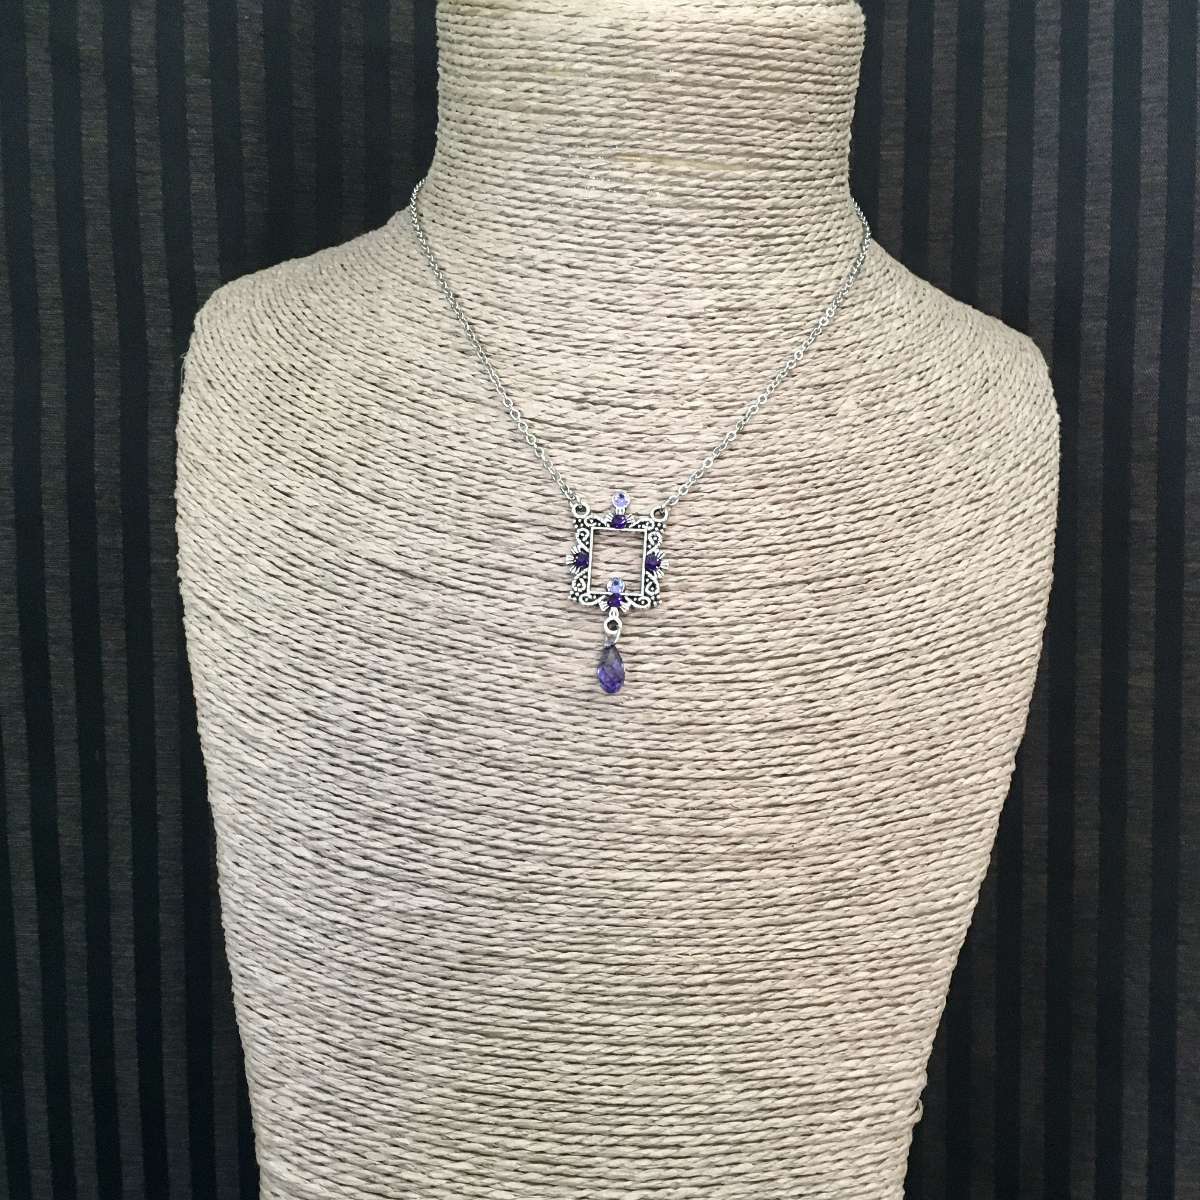 "Lolany" collier d'inspiration art déco